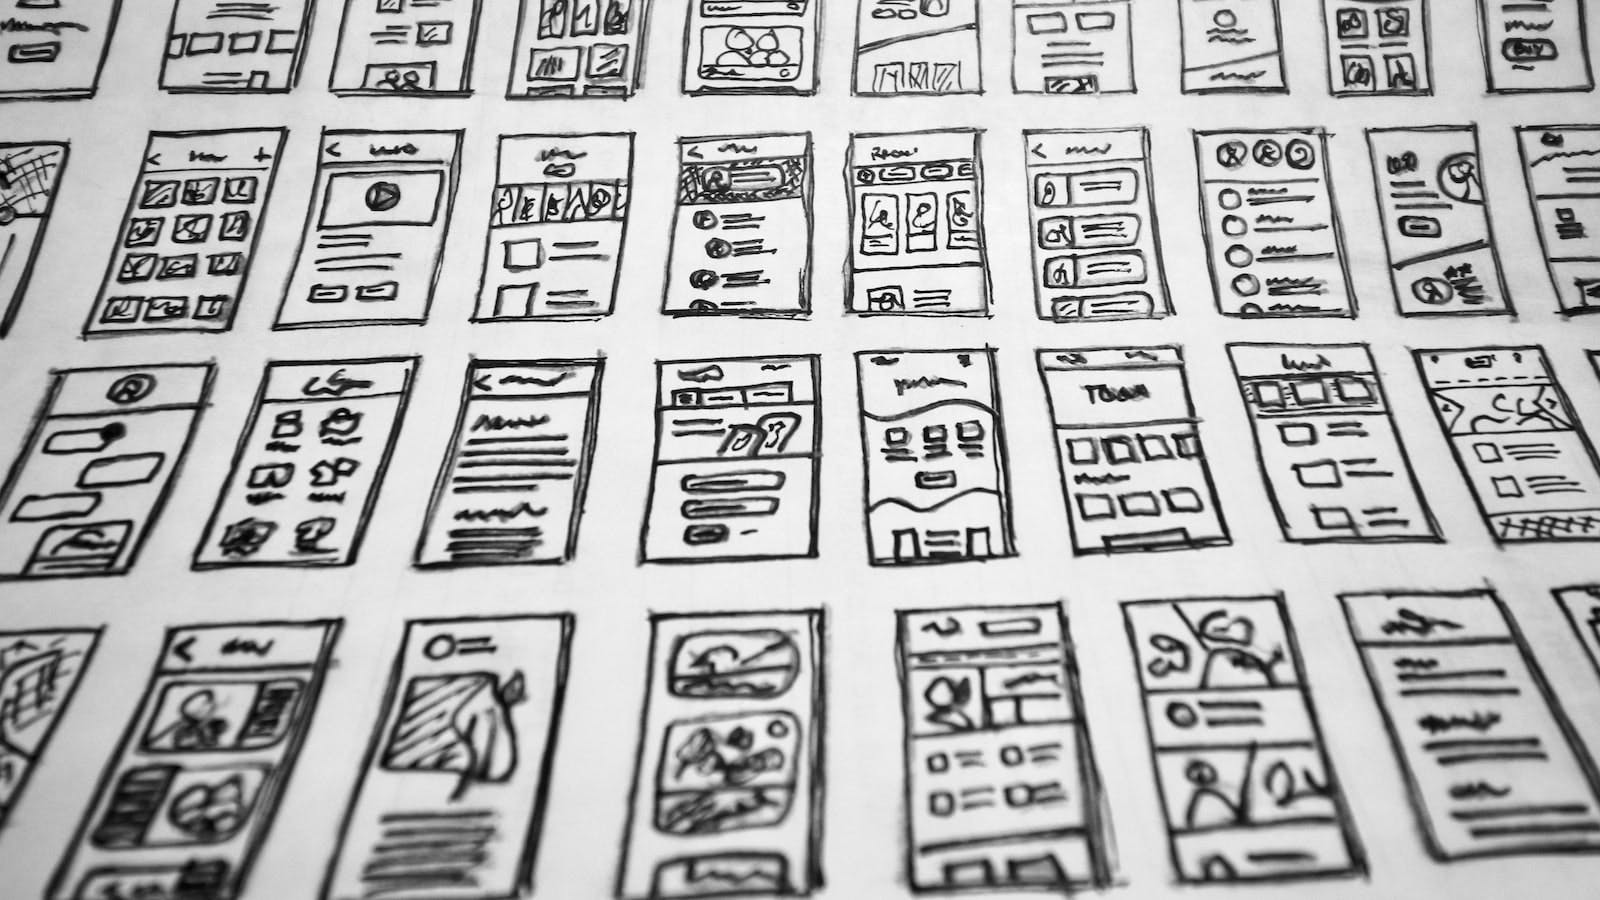 Paper with wireframe sketches